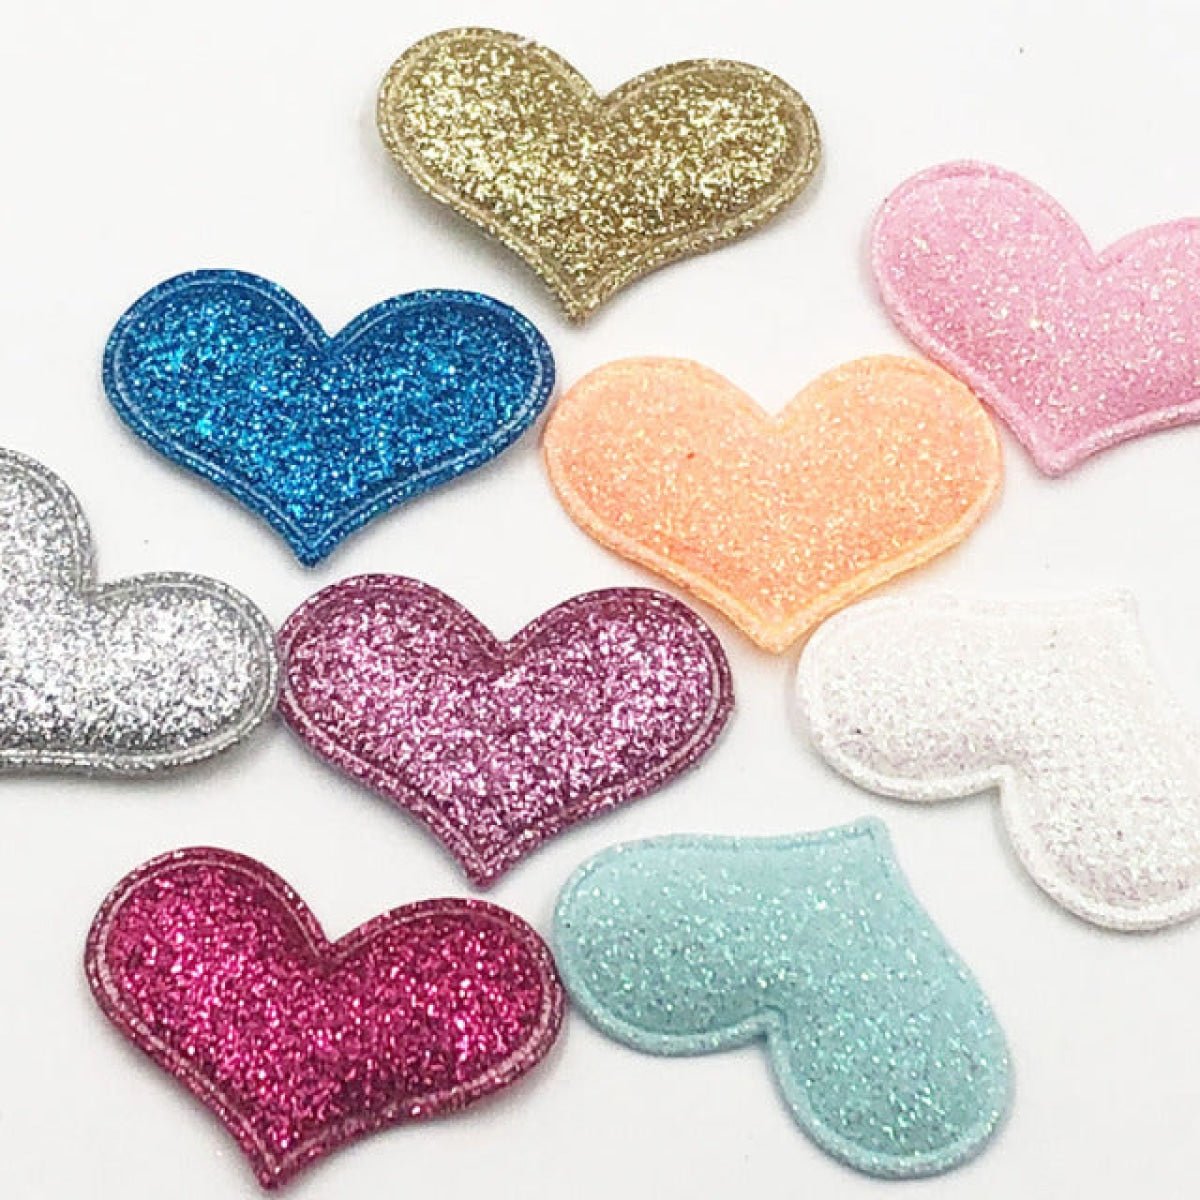 50pcs 35mmx30mm Glitter Padded Heart Felt Patches Appliques For Clothing Sewing DIY Wedding Decoration Toy Craft Shapes PU Leather - Mixed Colours - - Asia Sell